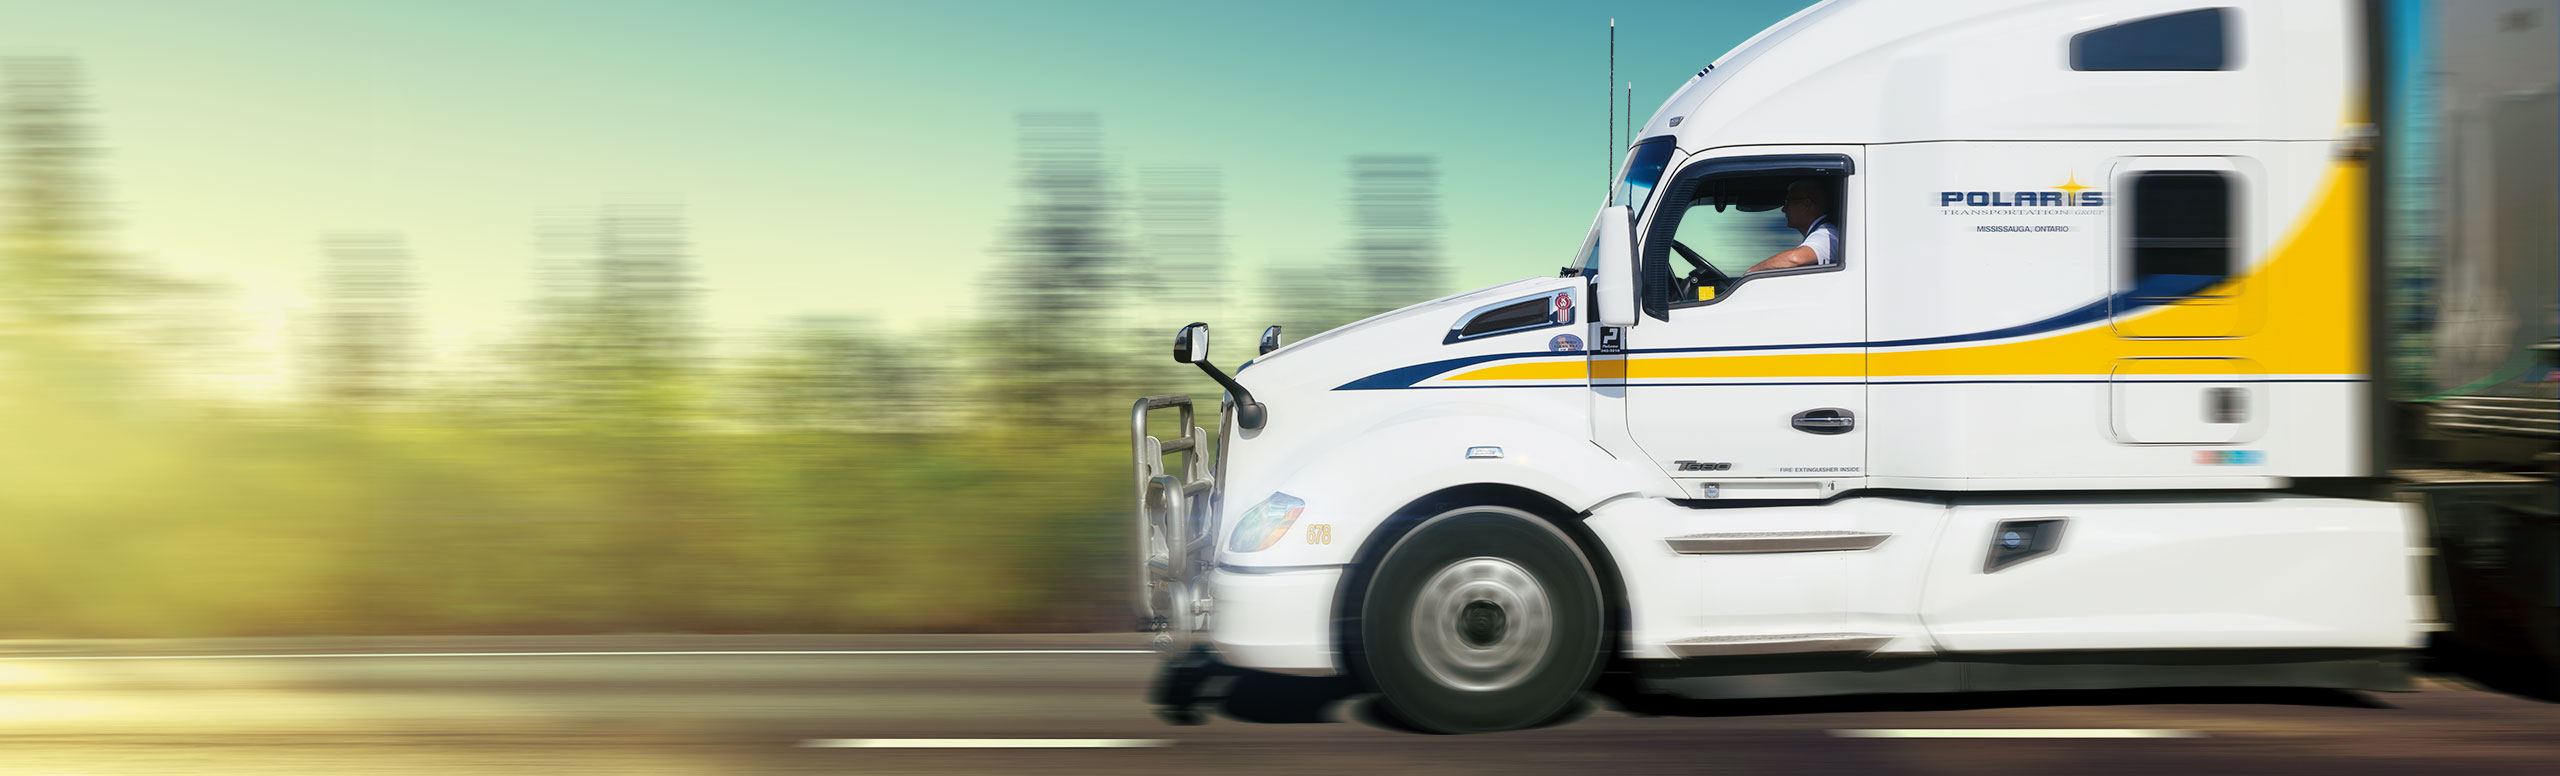 Polaris transport truck driving on highway with background blurred